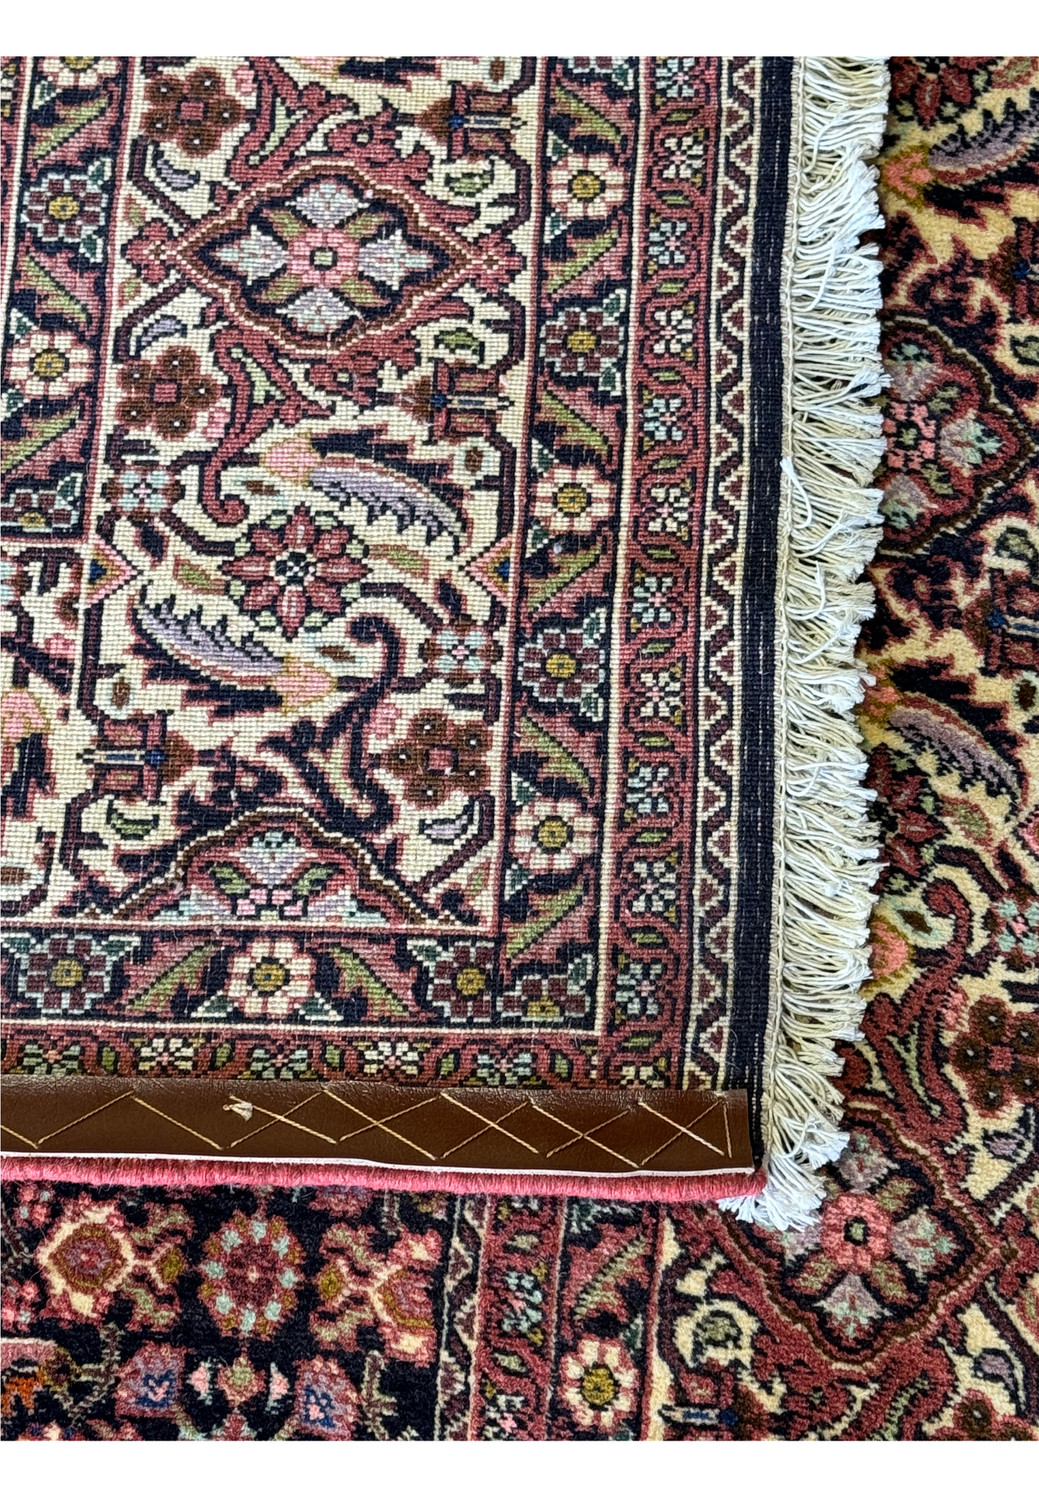 Corner section of a Persian Bijar rug illustrating the transition from the richly decorated border to the dense floral pattern of the field